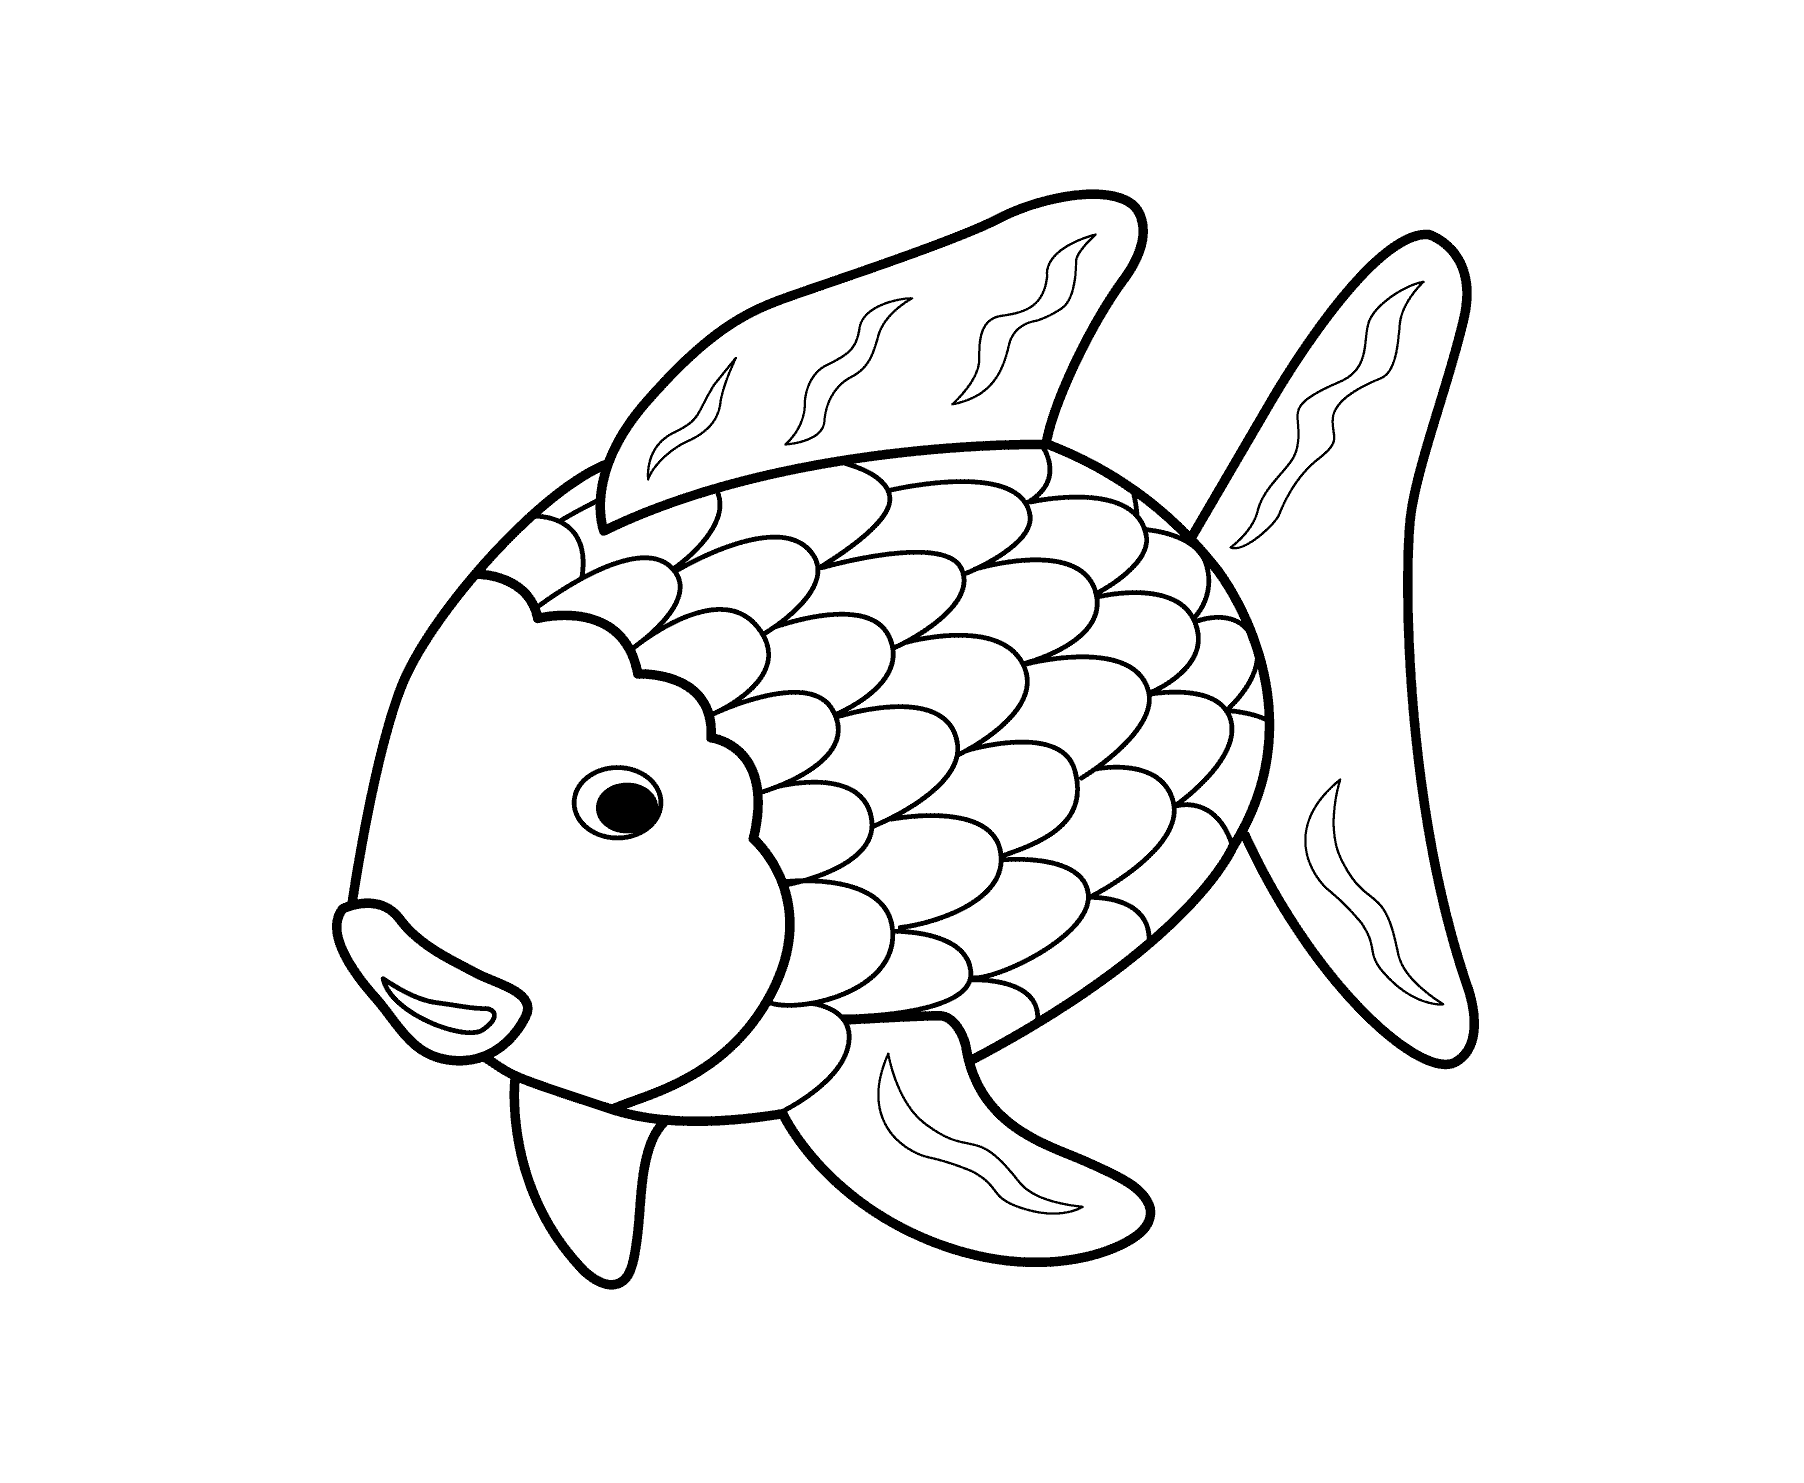 fish coloring pages to print free fish outlines for children download free clip art print pages fish to coloring 